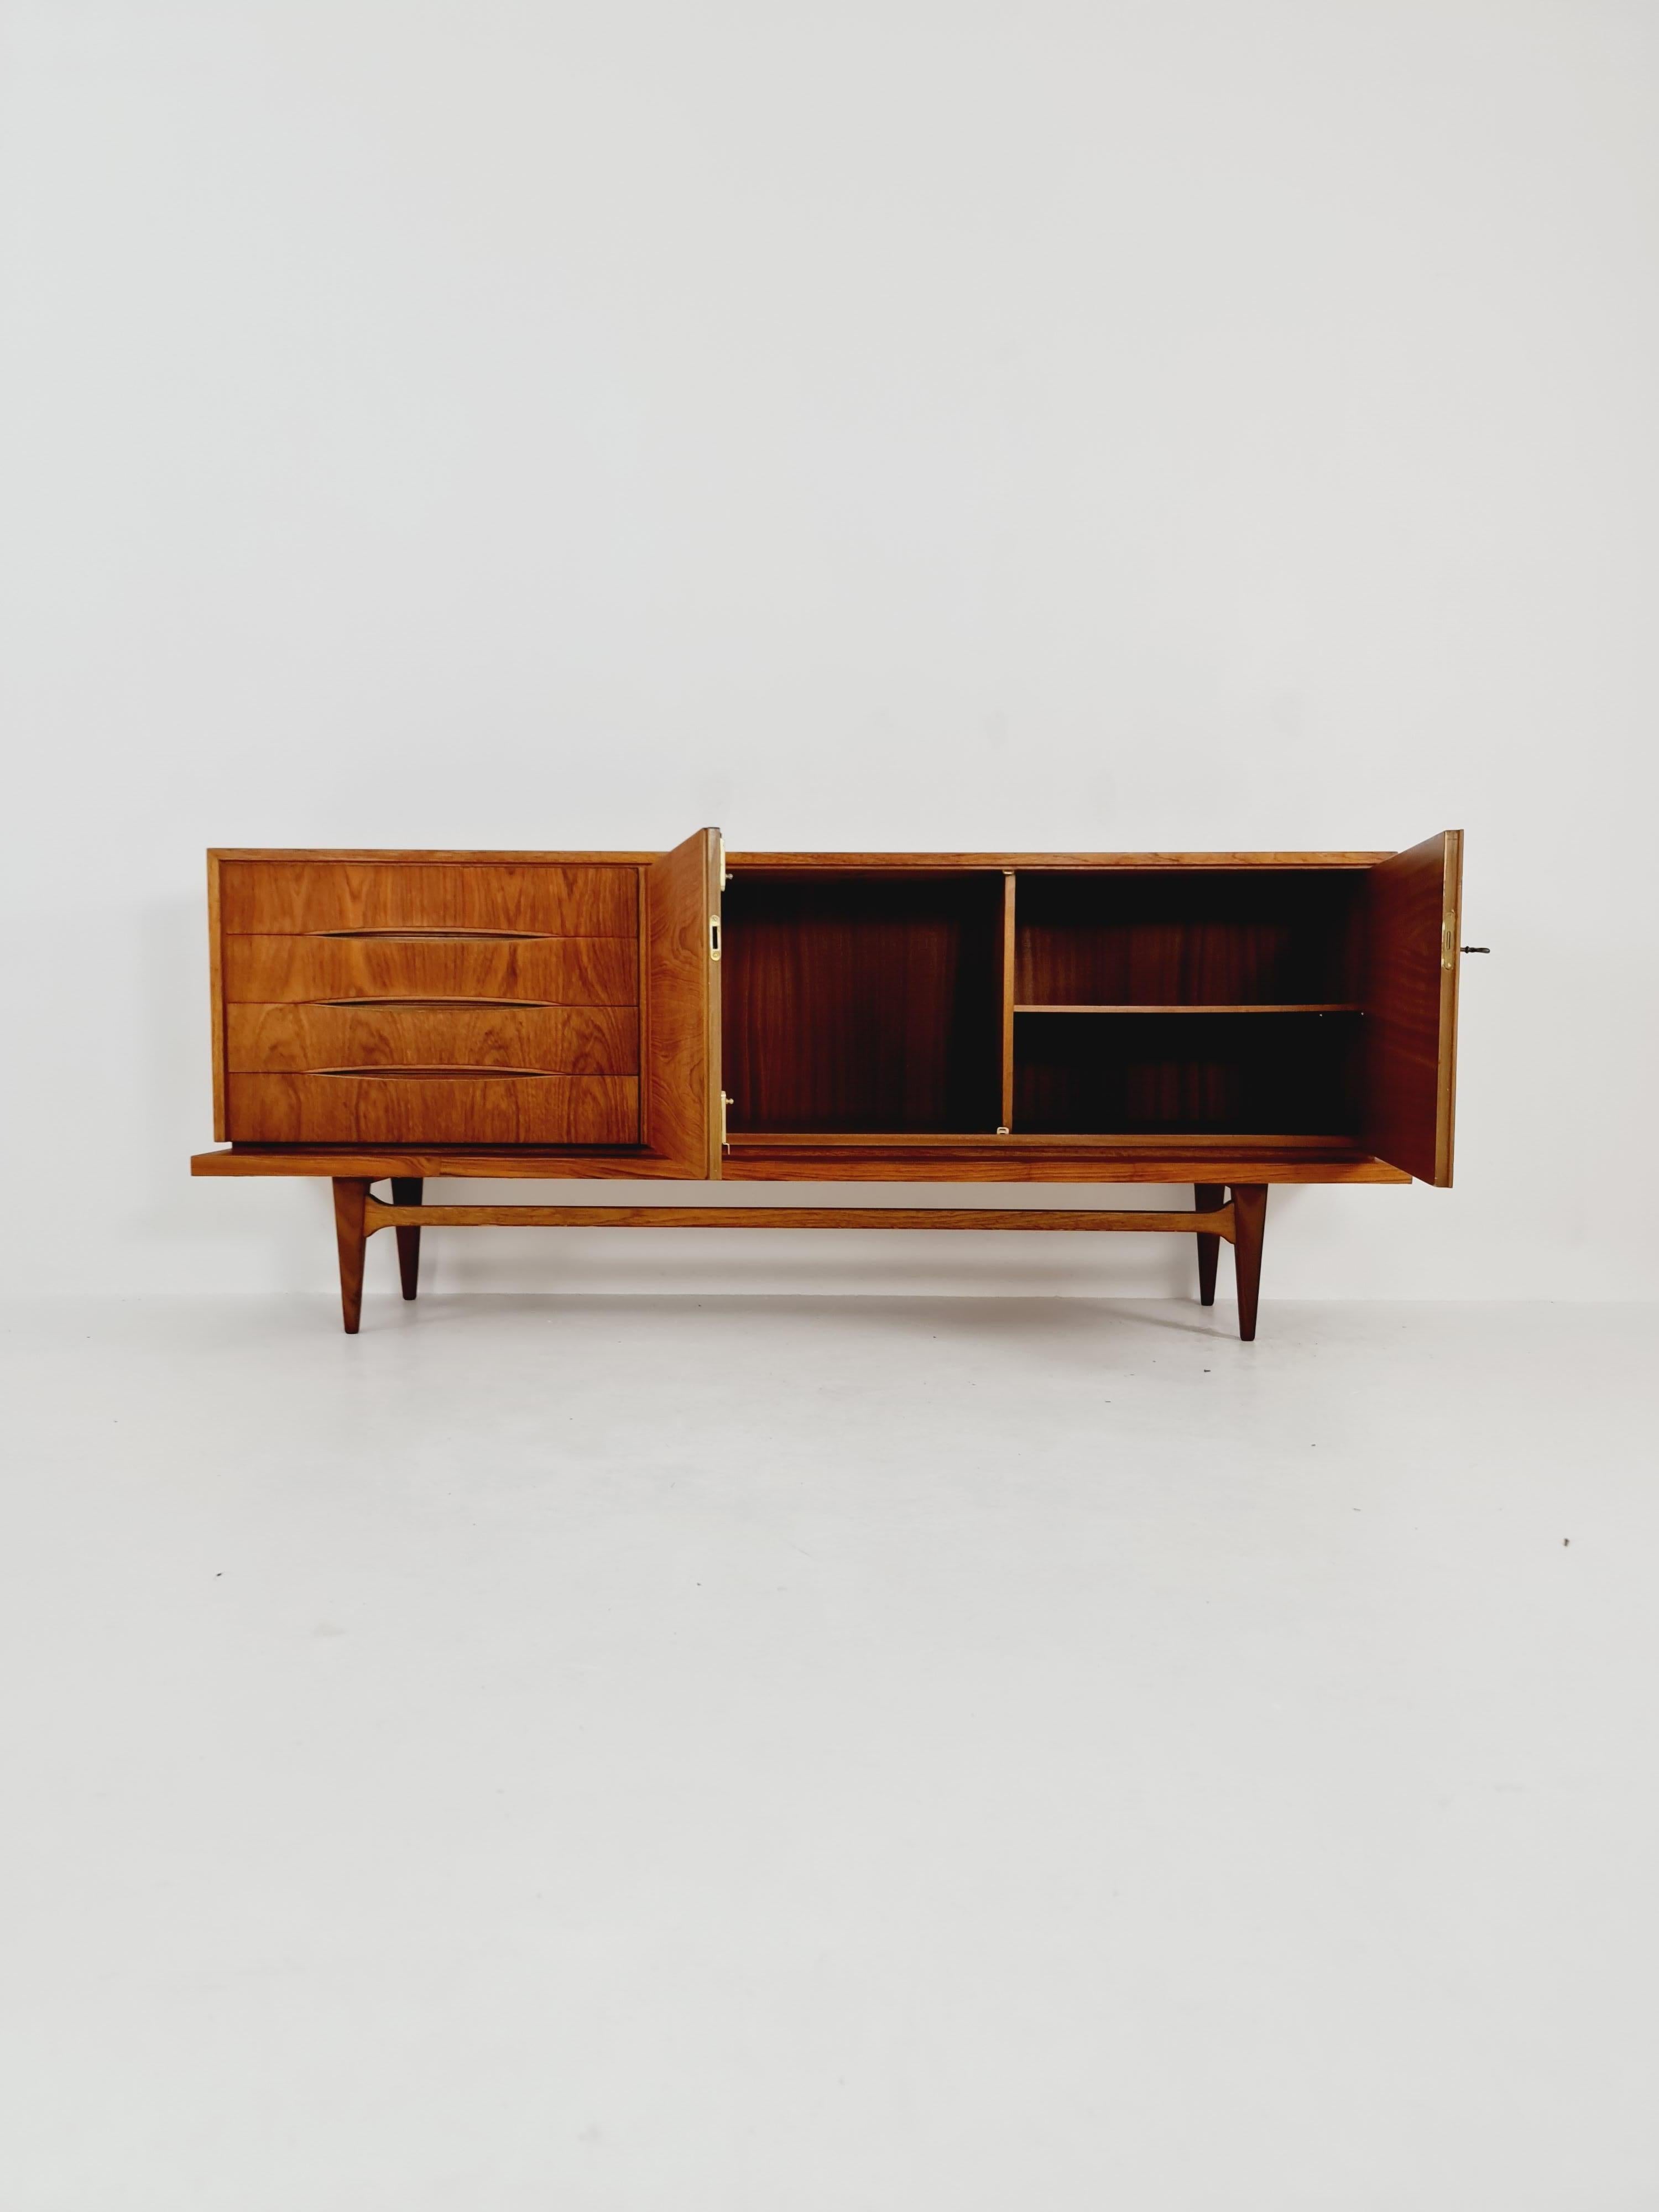 Rare Mid Century Modern Danish teak sideboard, 1960s 

Design year: 1960s

Dimensions: 
45 D x 205 W x 83 H cm

It is in good vintage condition, however, as with all vintage items some minor wear marks should be expected.

Please inquiry for prices